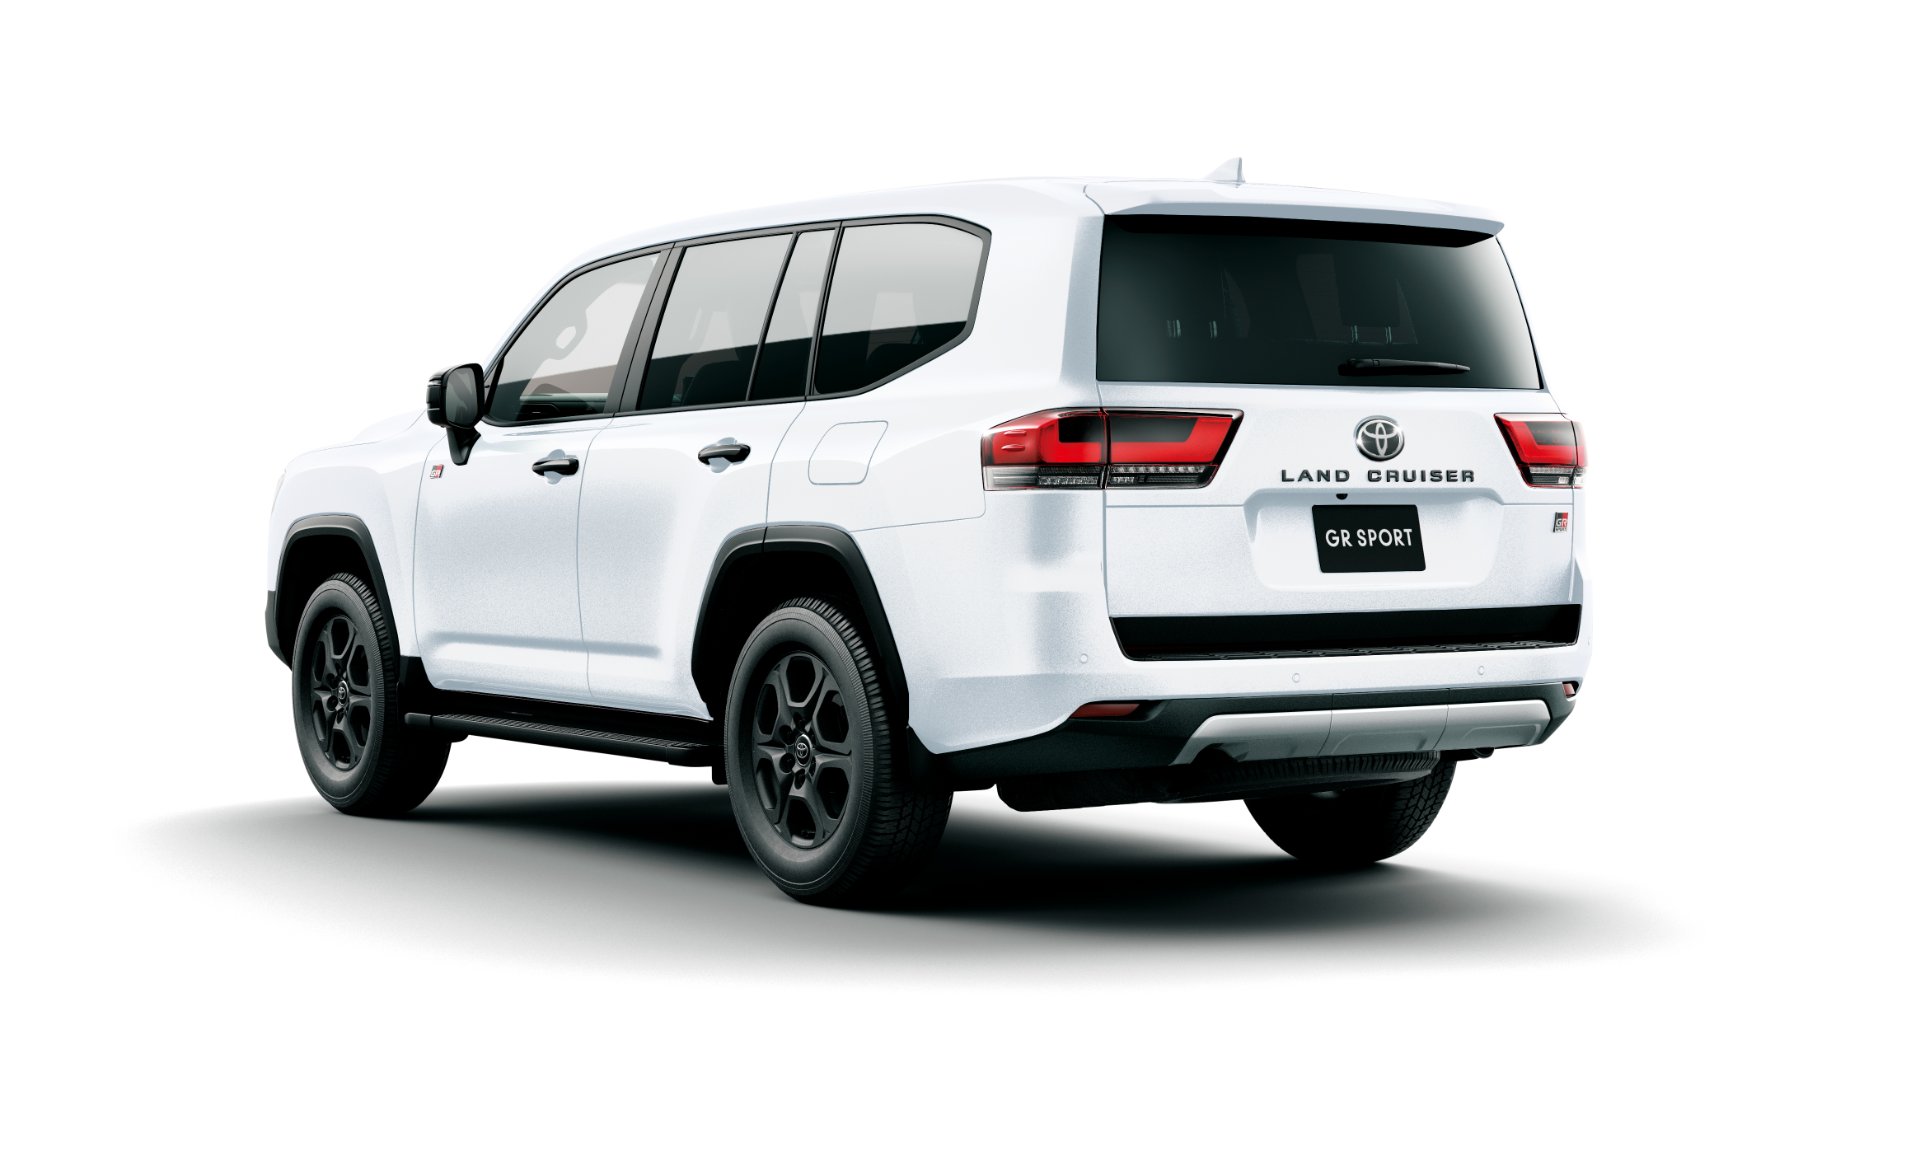 2022 Toyota Land Cruiser 300 Gr Sport Super Large Suv With Advanced